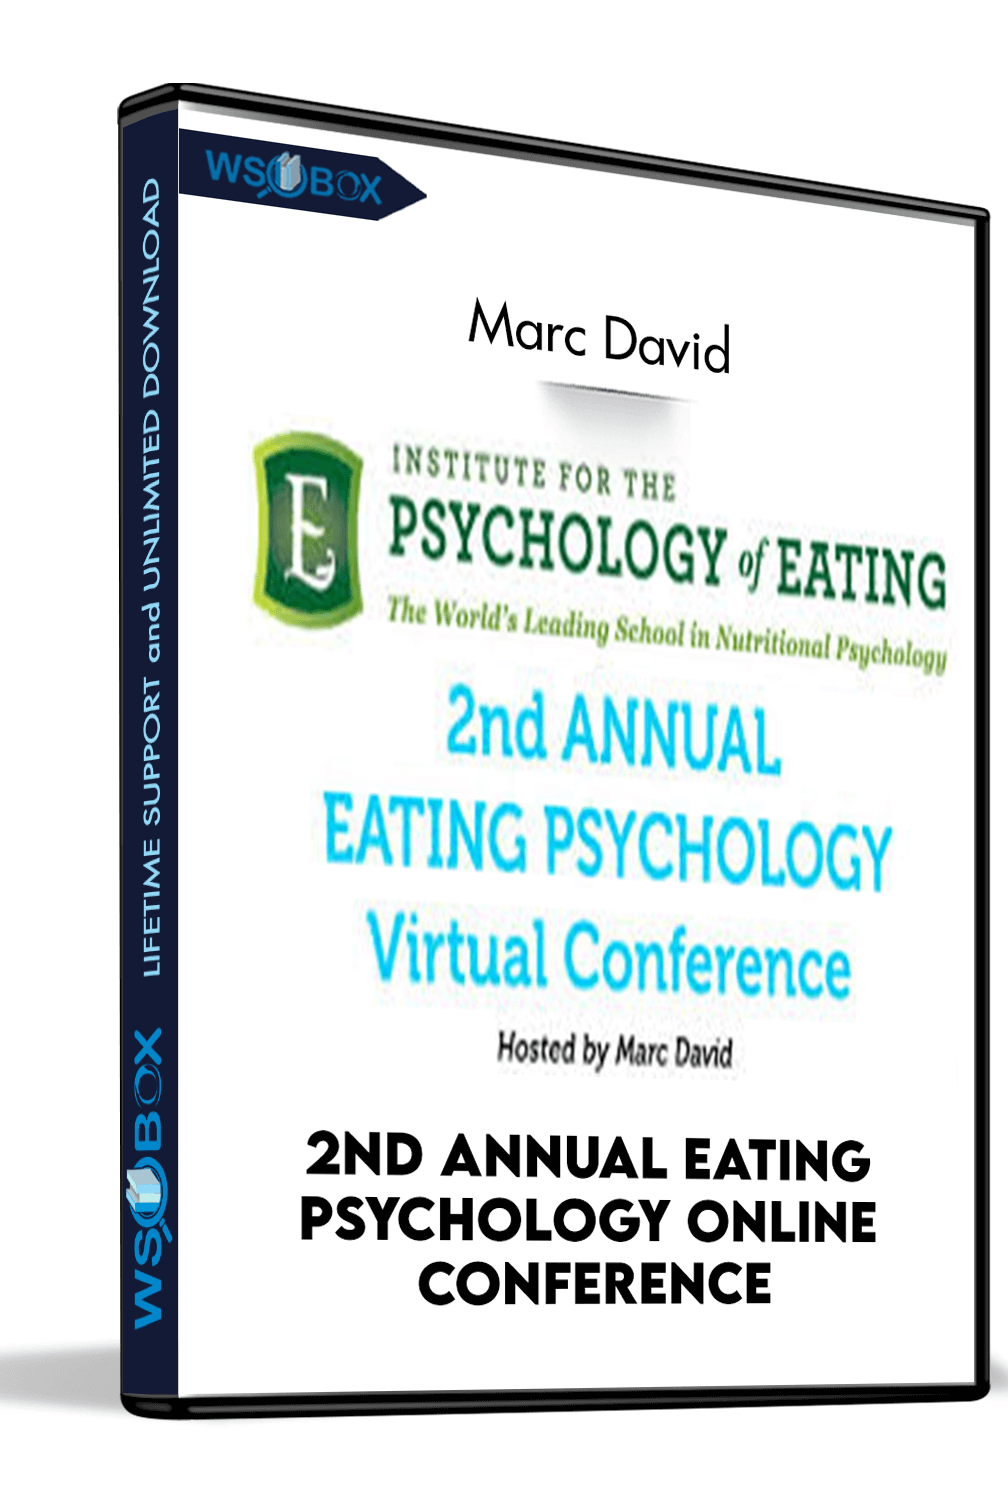 2nd Annual Eating Psychology Online Conference – Marc David